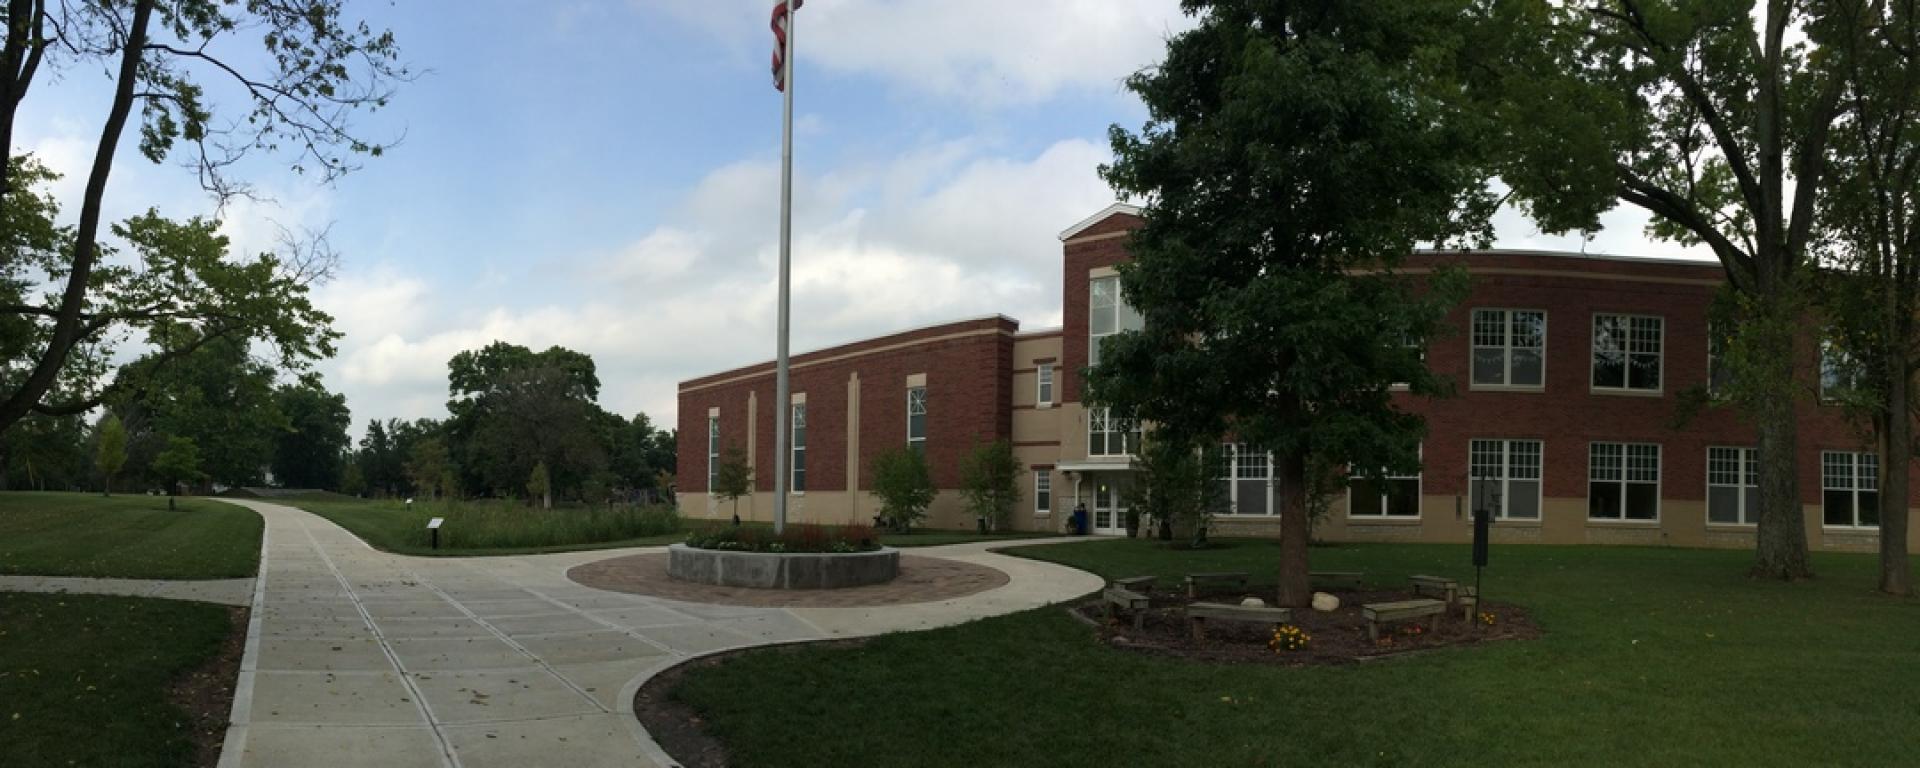 Terrace Park Elementary Learning Campus